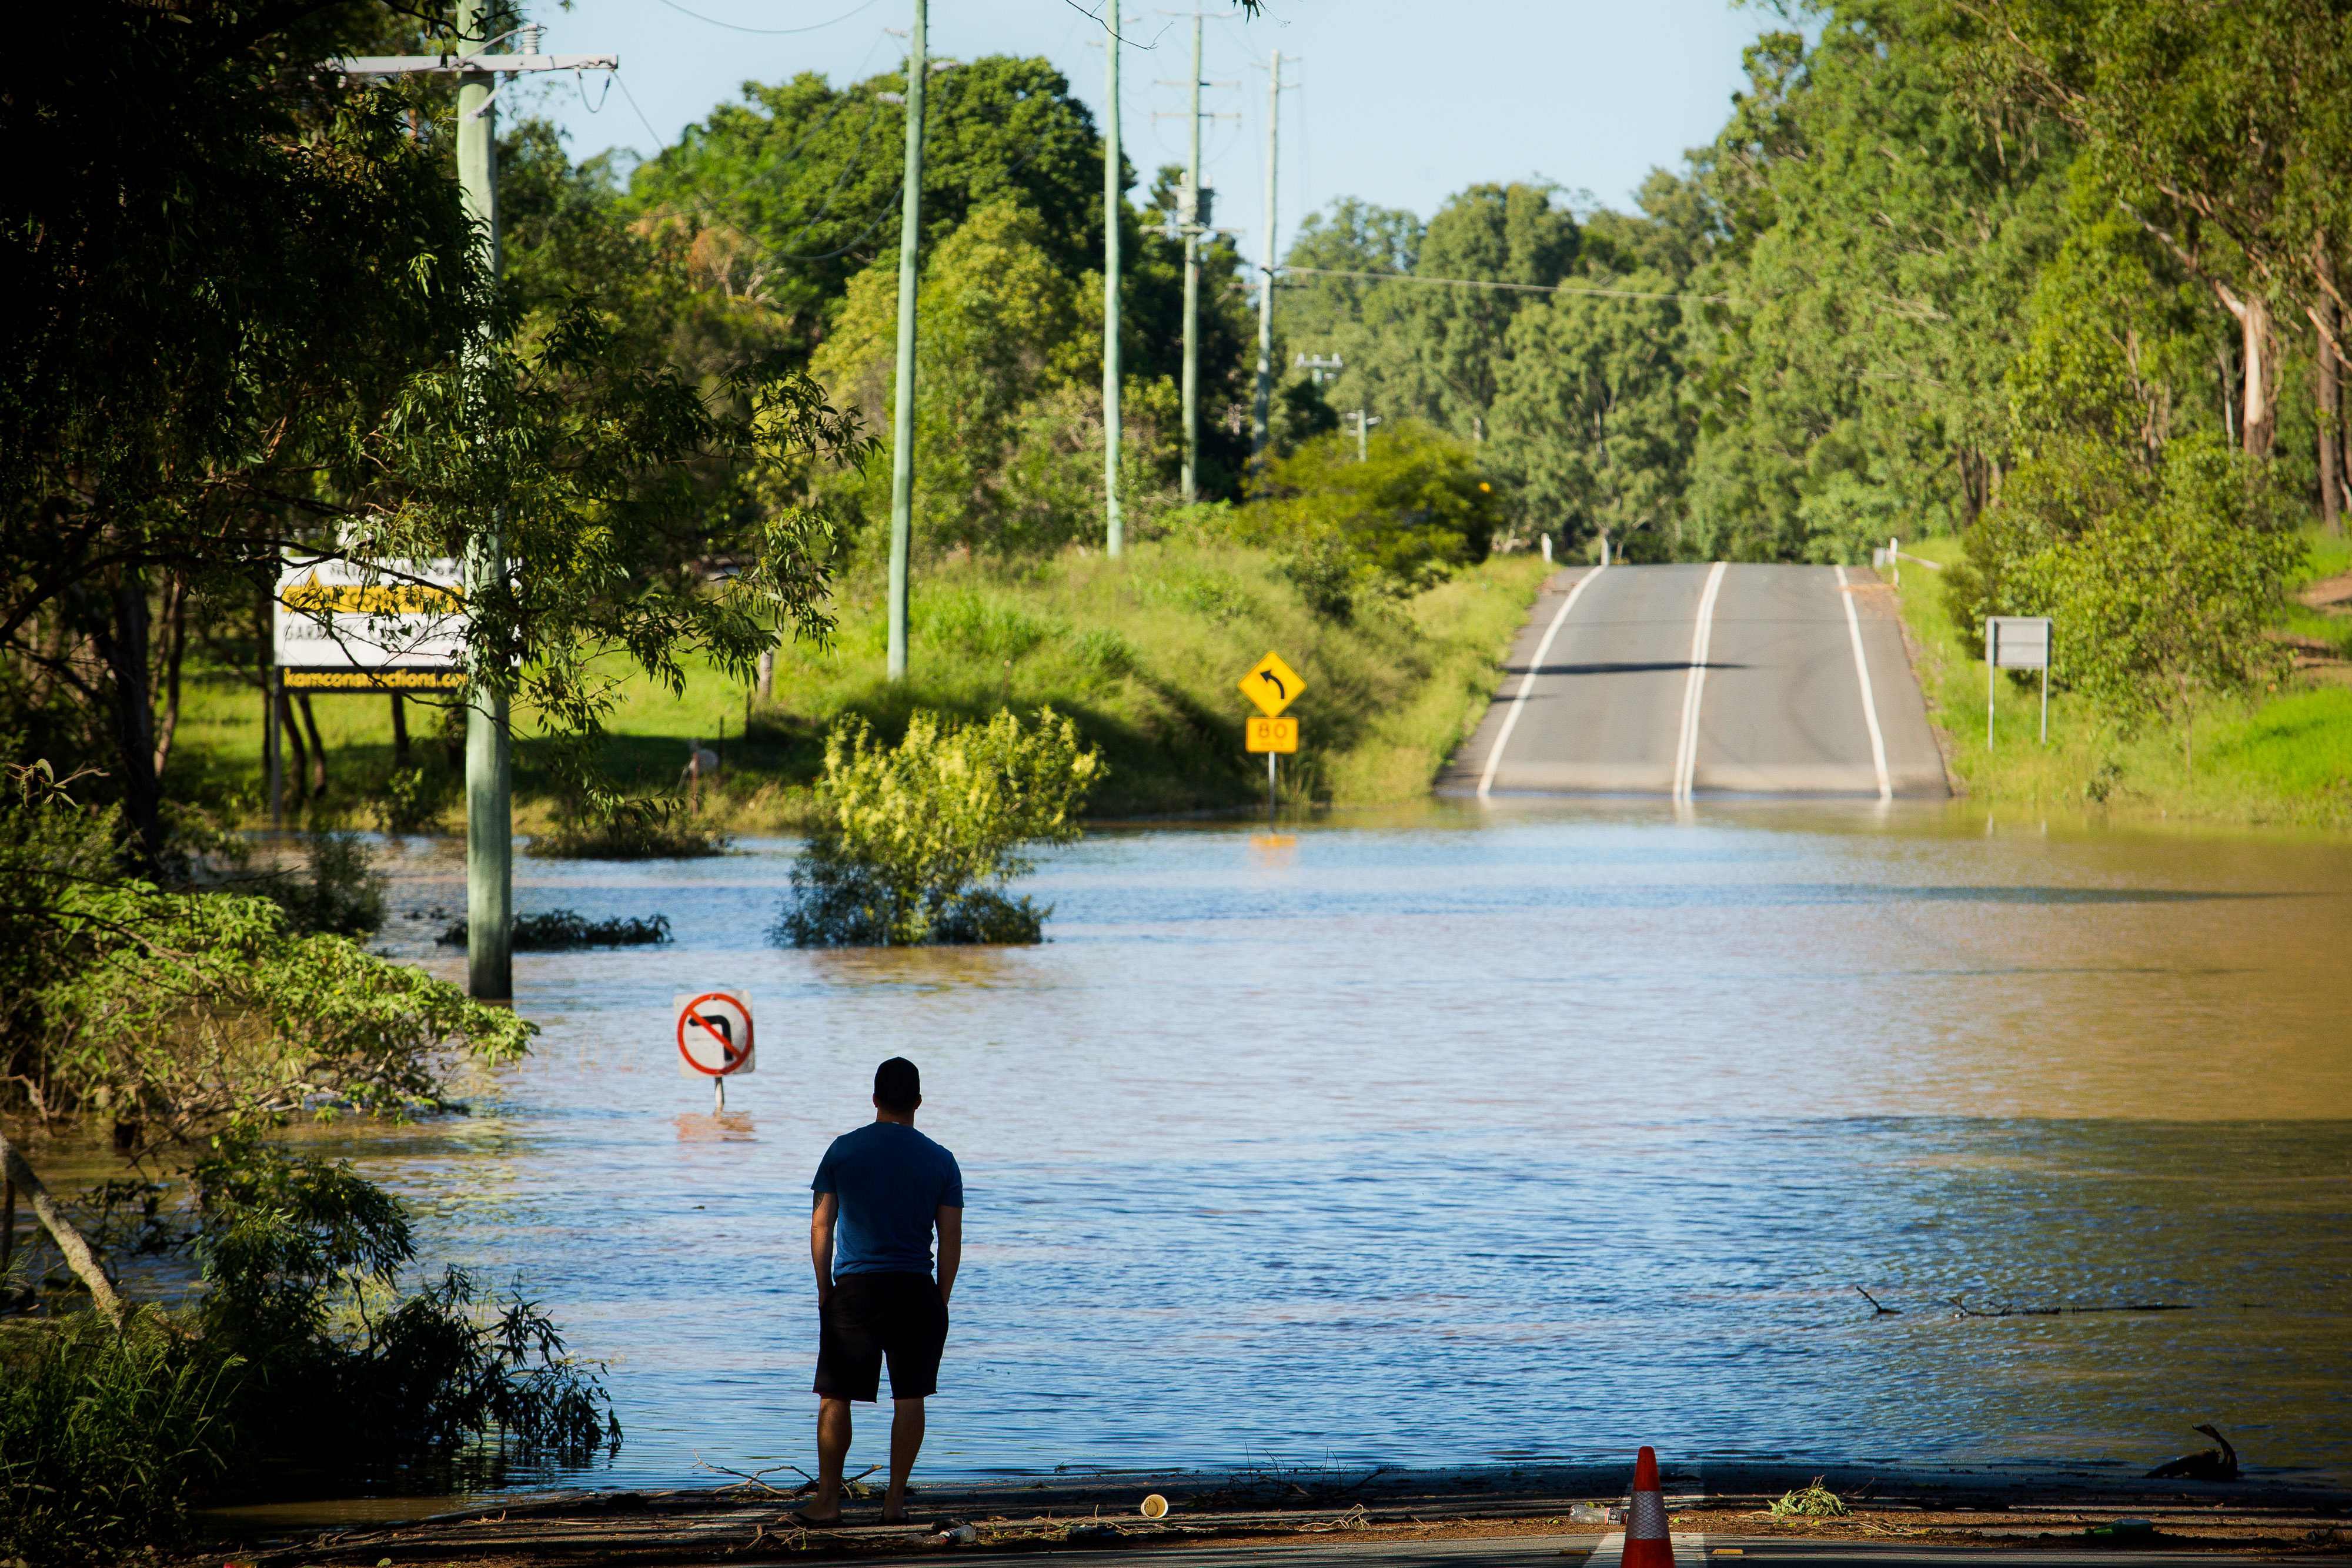 TOPSHOT - A resident looks at a road, submerged under floodwaters caused by Cyclone Debbie, in North MacLean, Brisbane on April 1, 2017. Flooded rivers were still rising on April 1 in two Australian states with two women dead and four people missing after torrential rains in the wake of a powerful tropical cyclone. / AFP PHOTO / Patrick HAMILTON / TT / kod 444